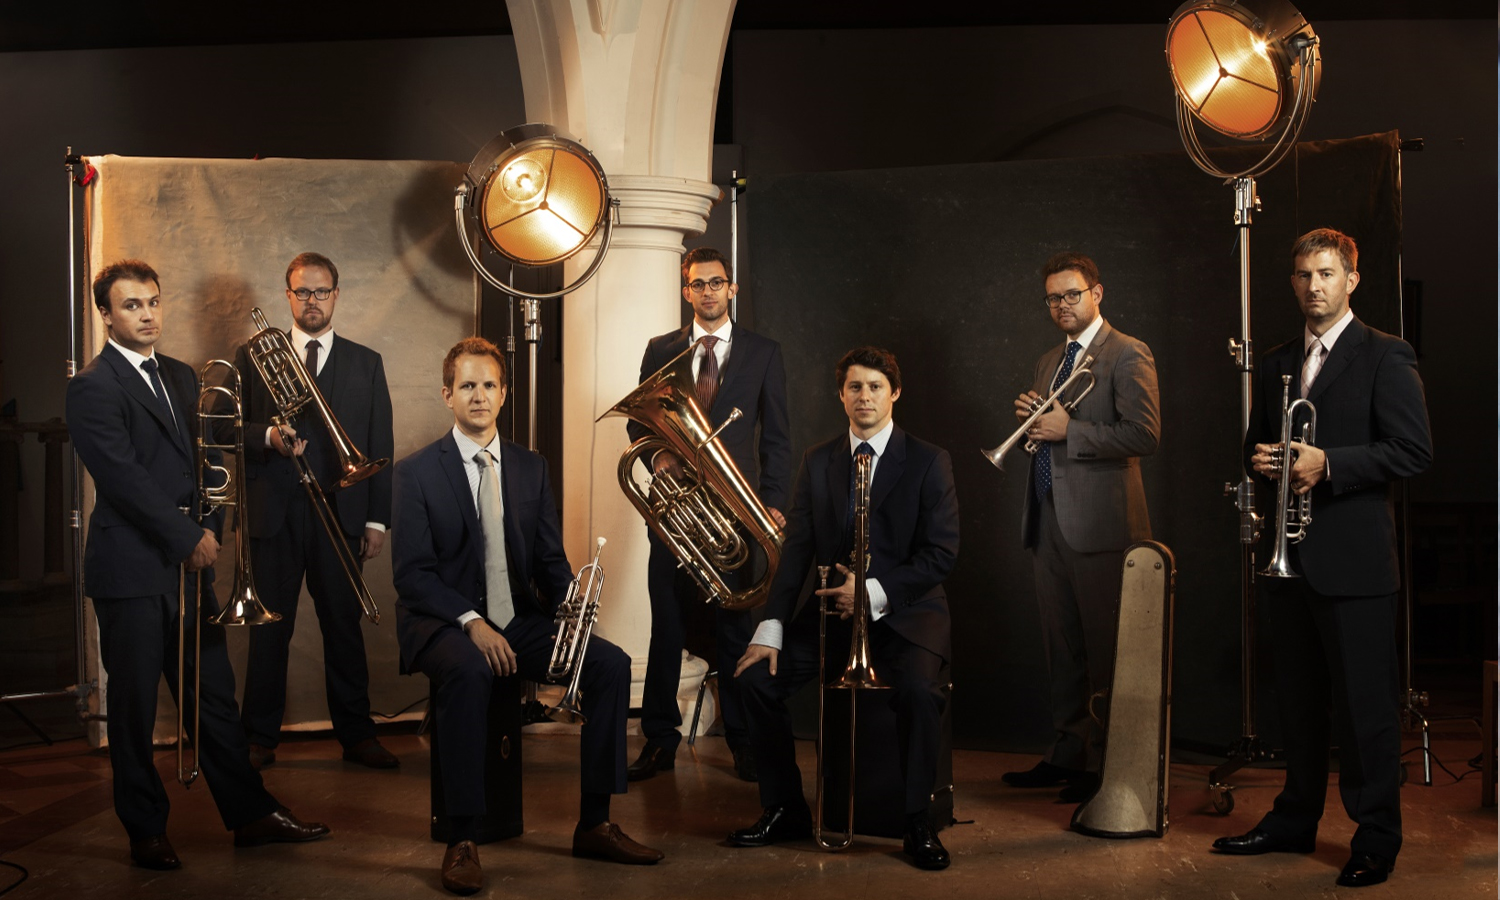 A group photo of the members of the Septura ensemble with their instruments